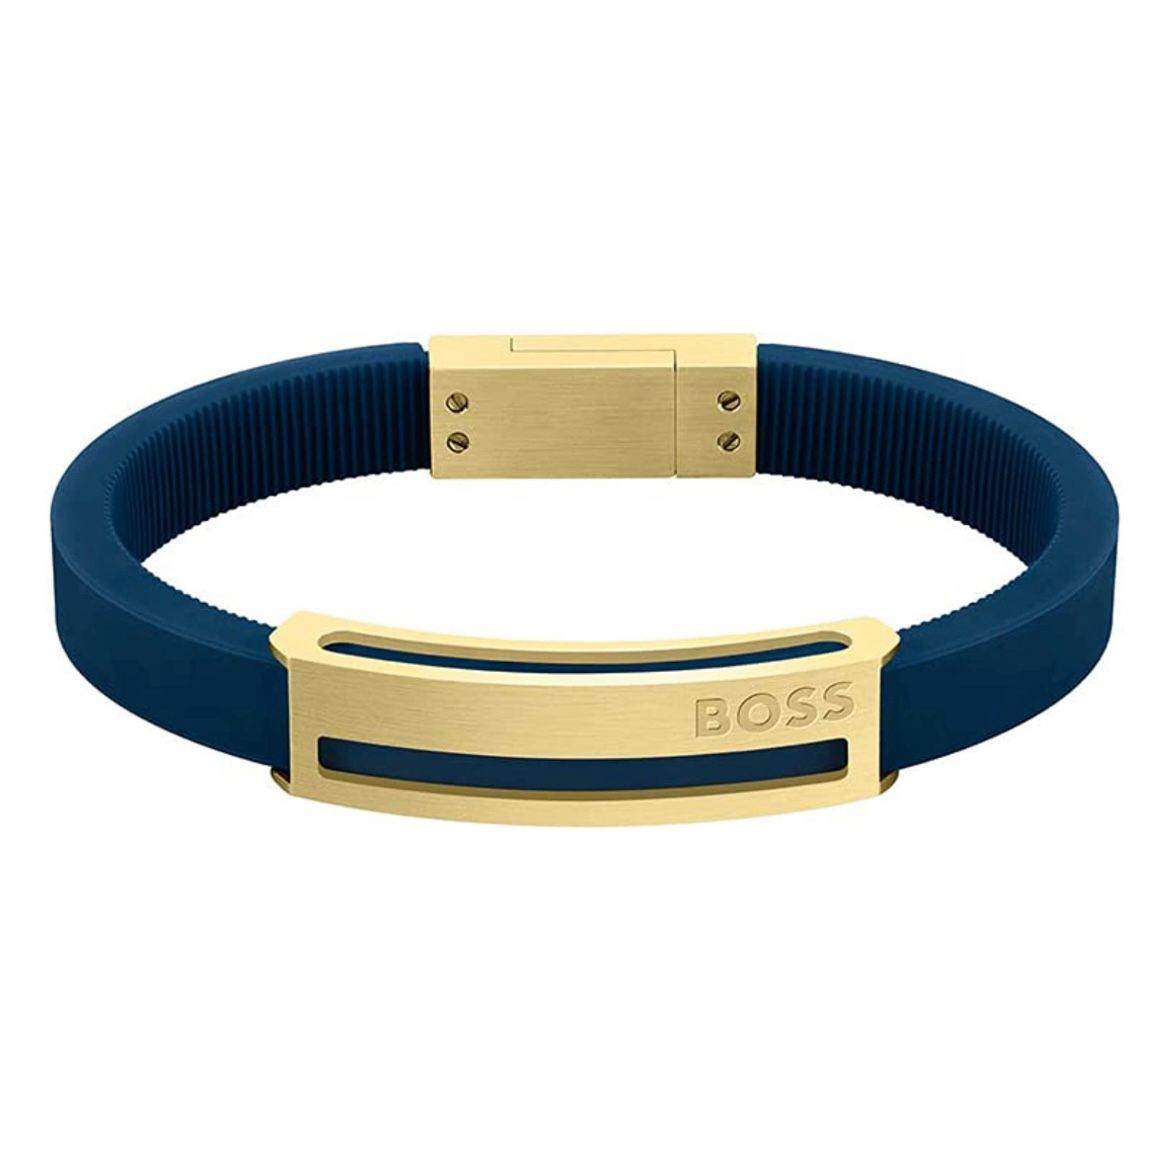 HUGO BOSS - MENS SARKIS A COLLECTION BLUE SILICONE BRACELET 1580362S